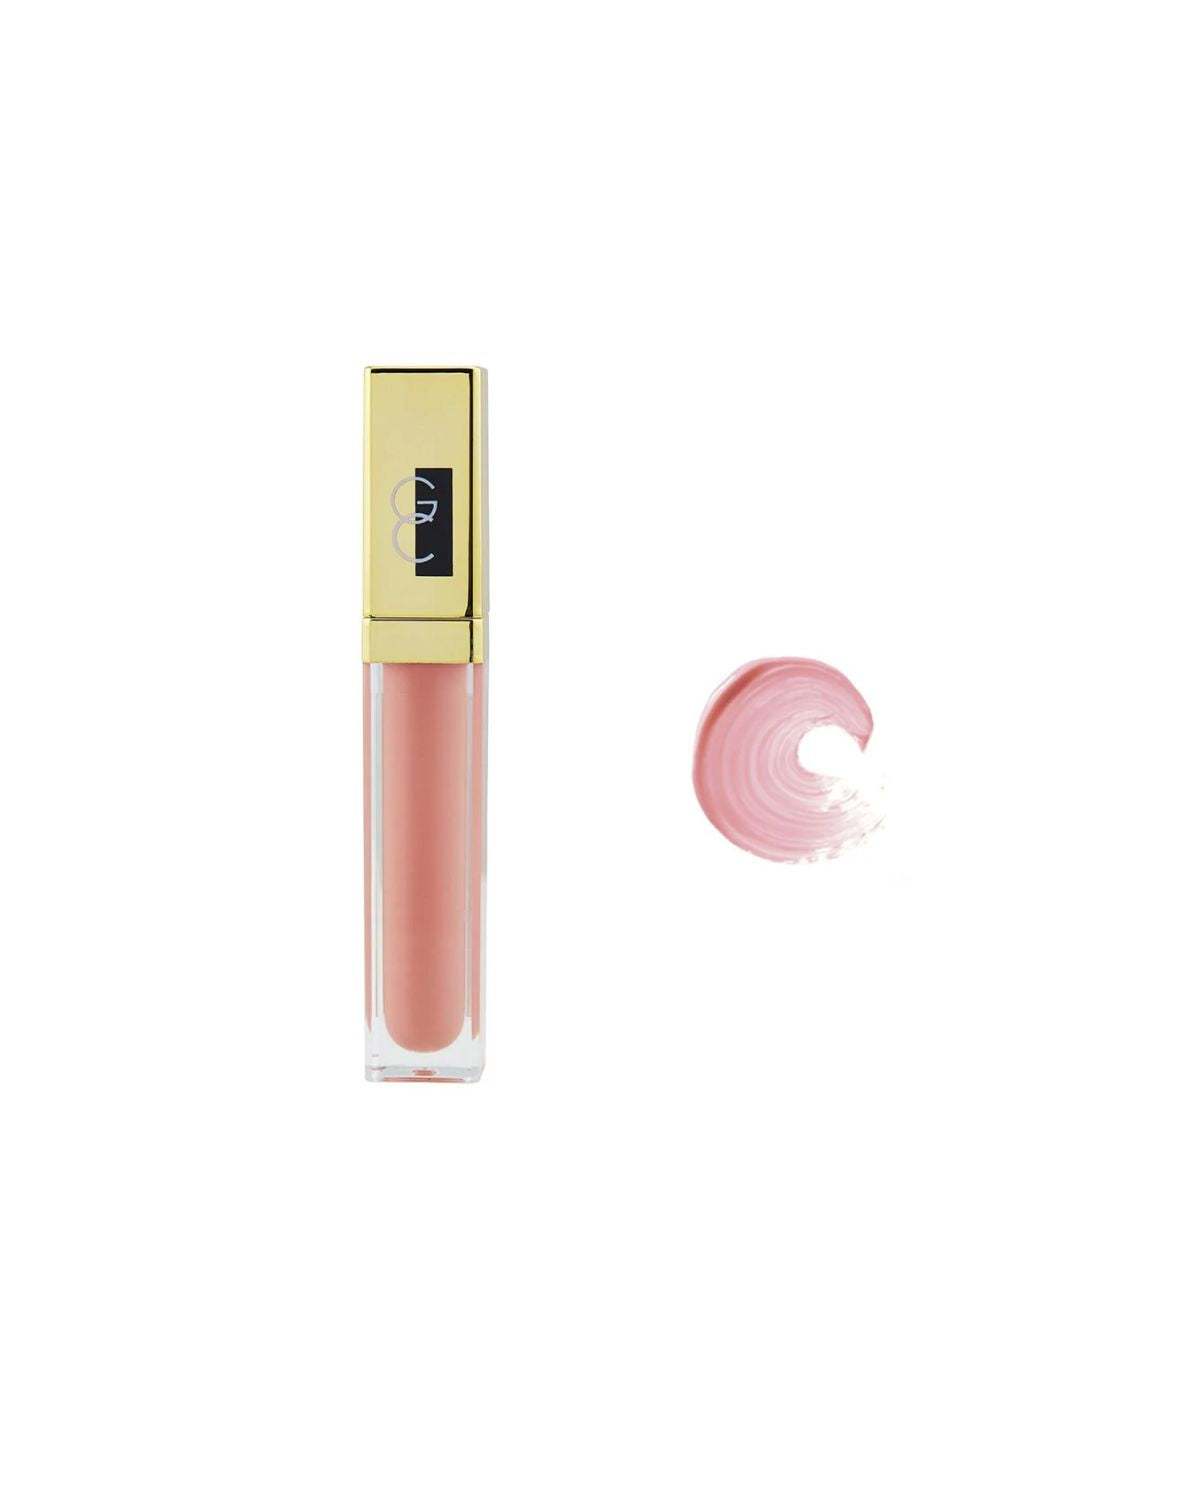 Gerard Cosmetics Color your Smile Lighted Lip Gloss